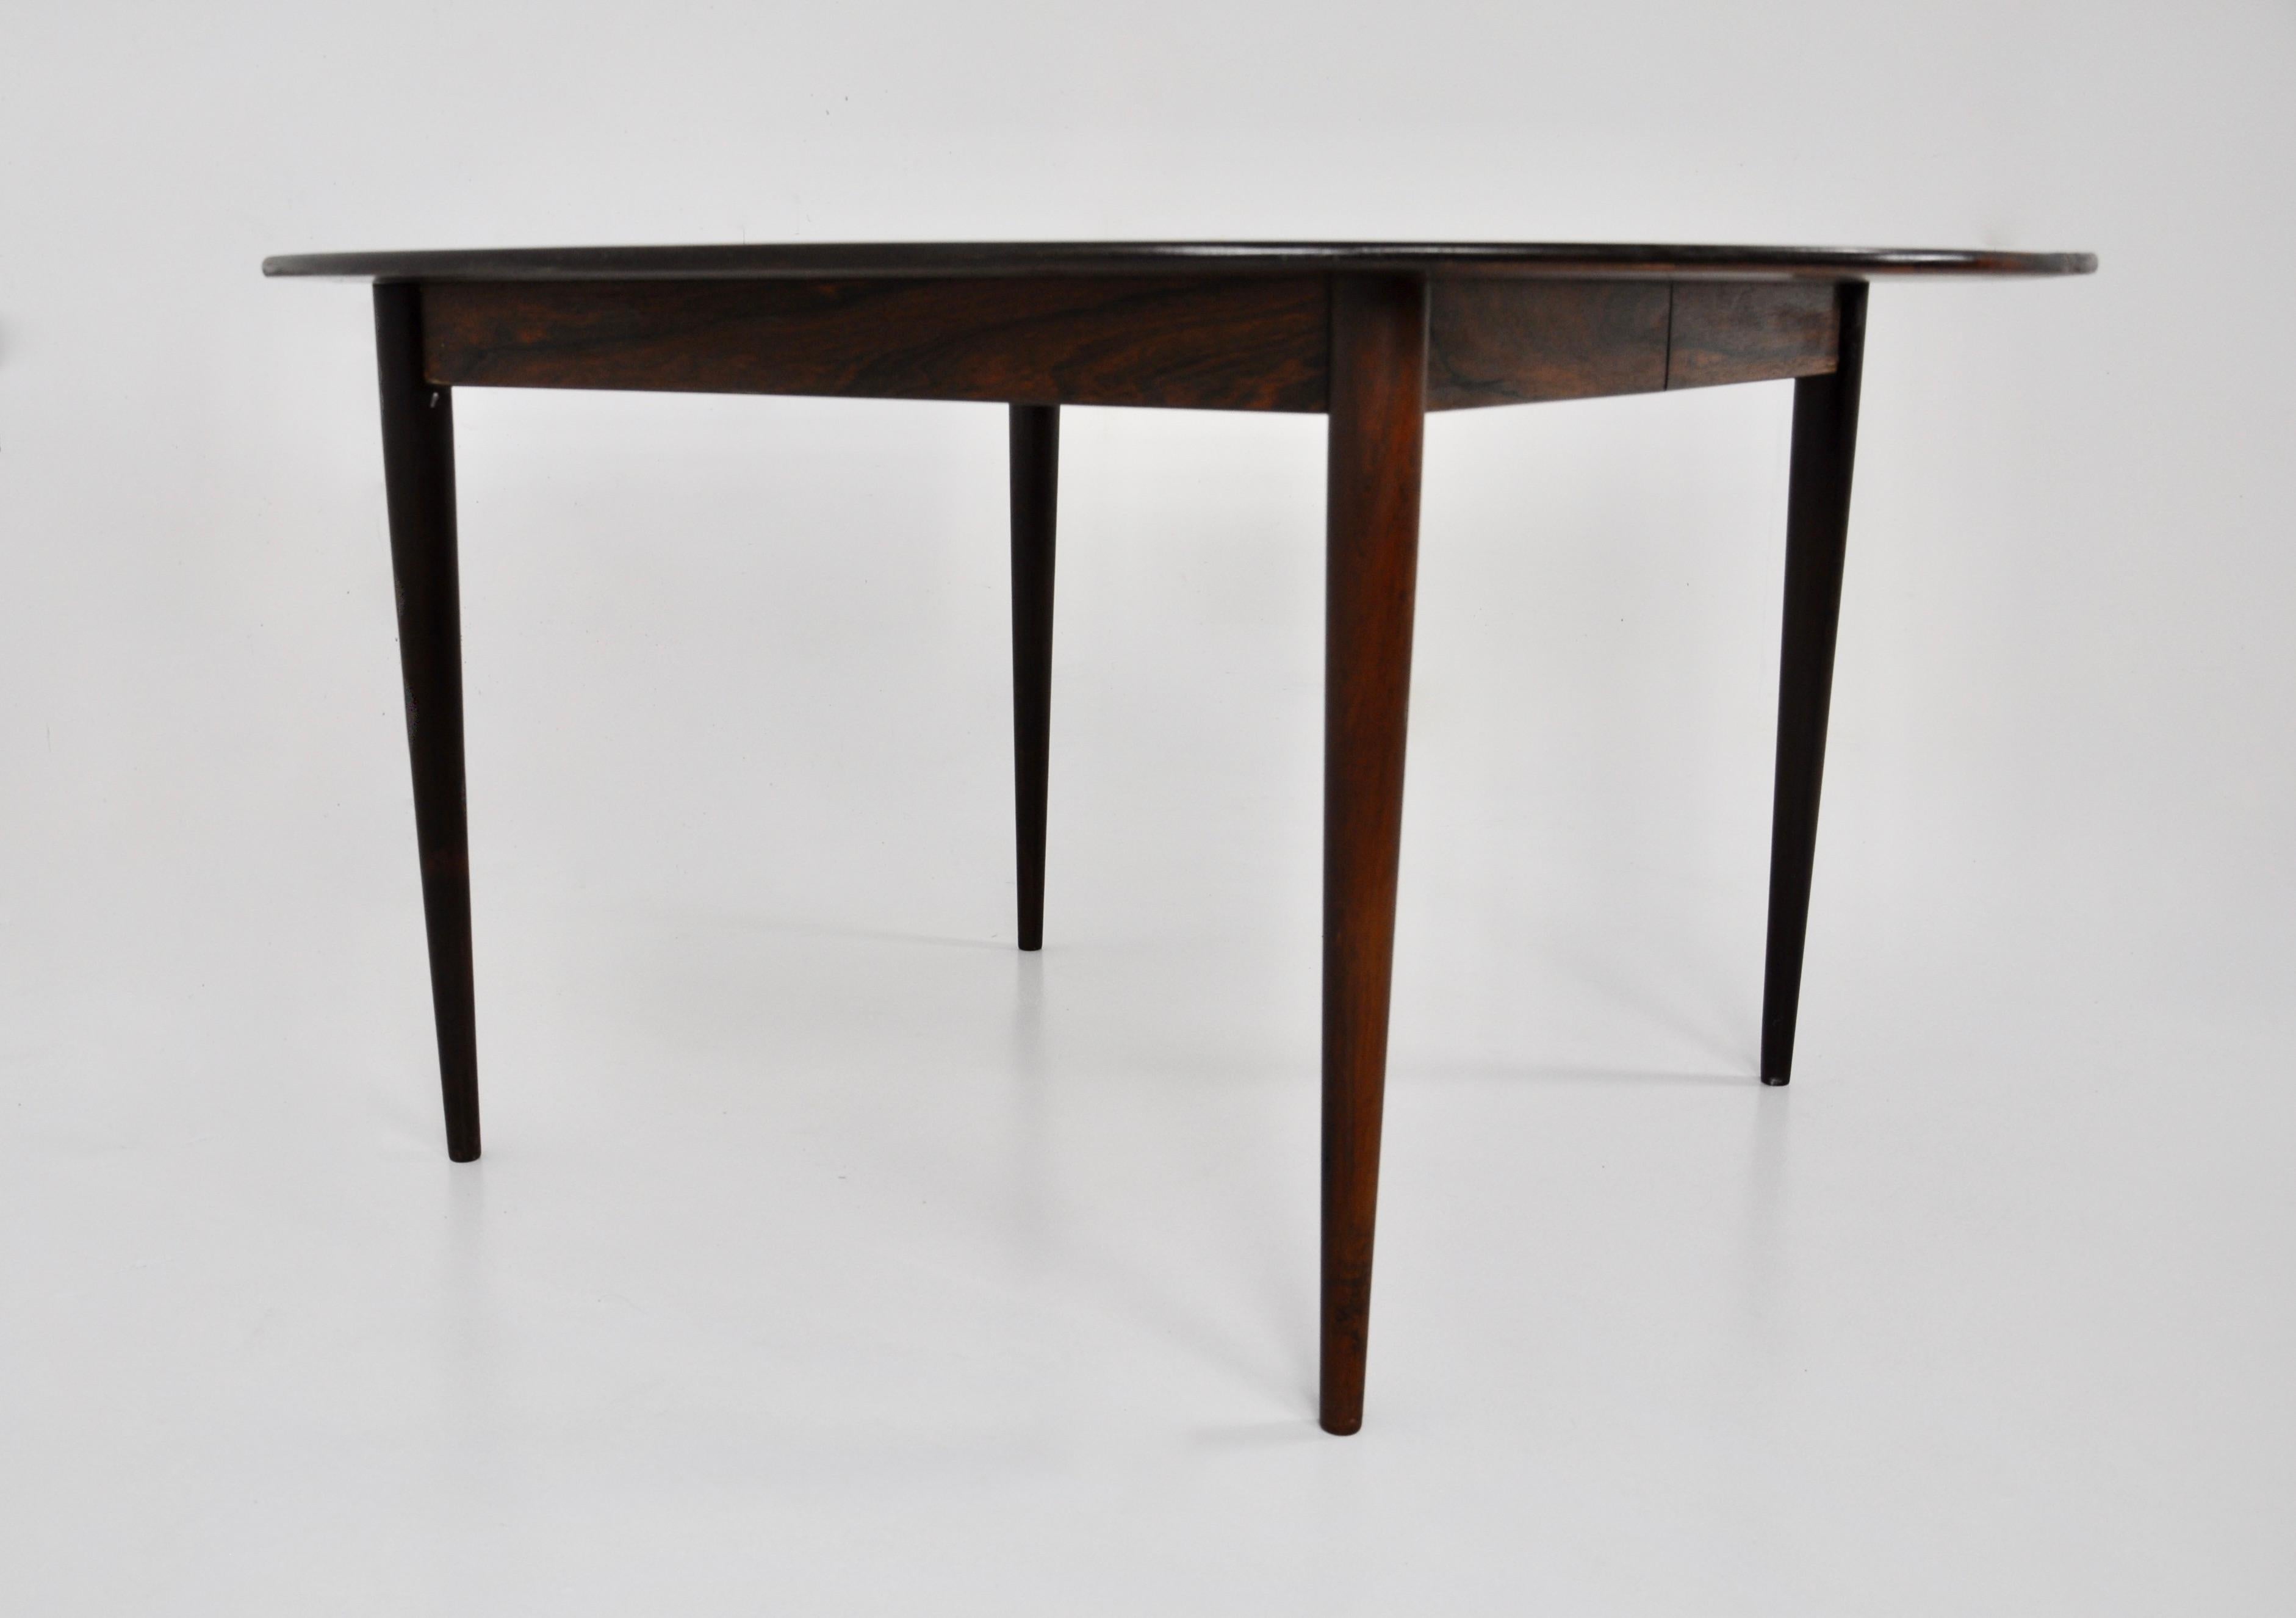 Danish Round Dining Table by Grete Jalk for CJ Rosengaarden, 1960s For Sale